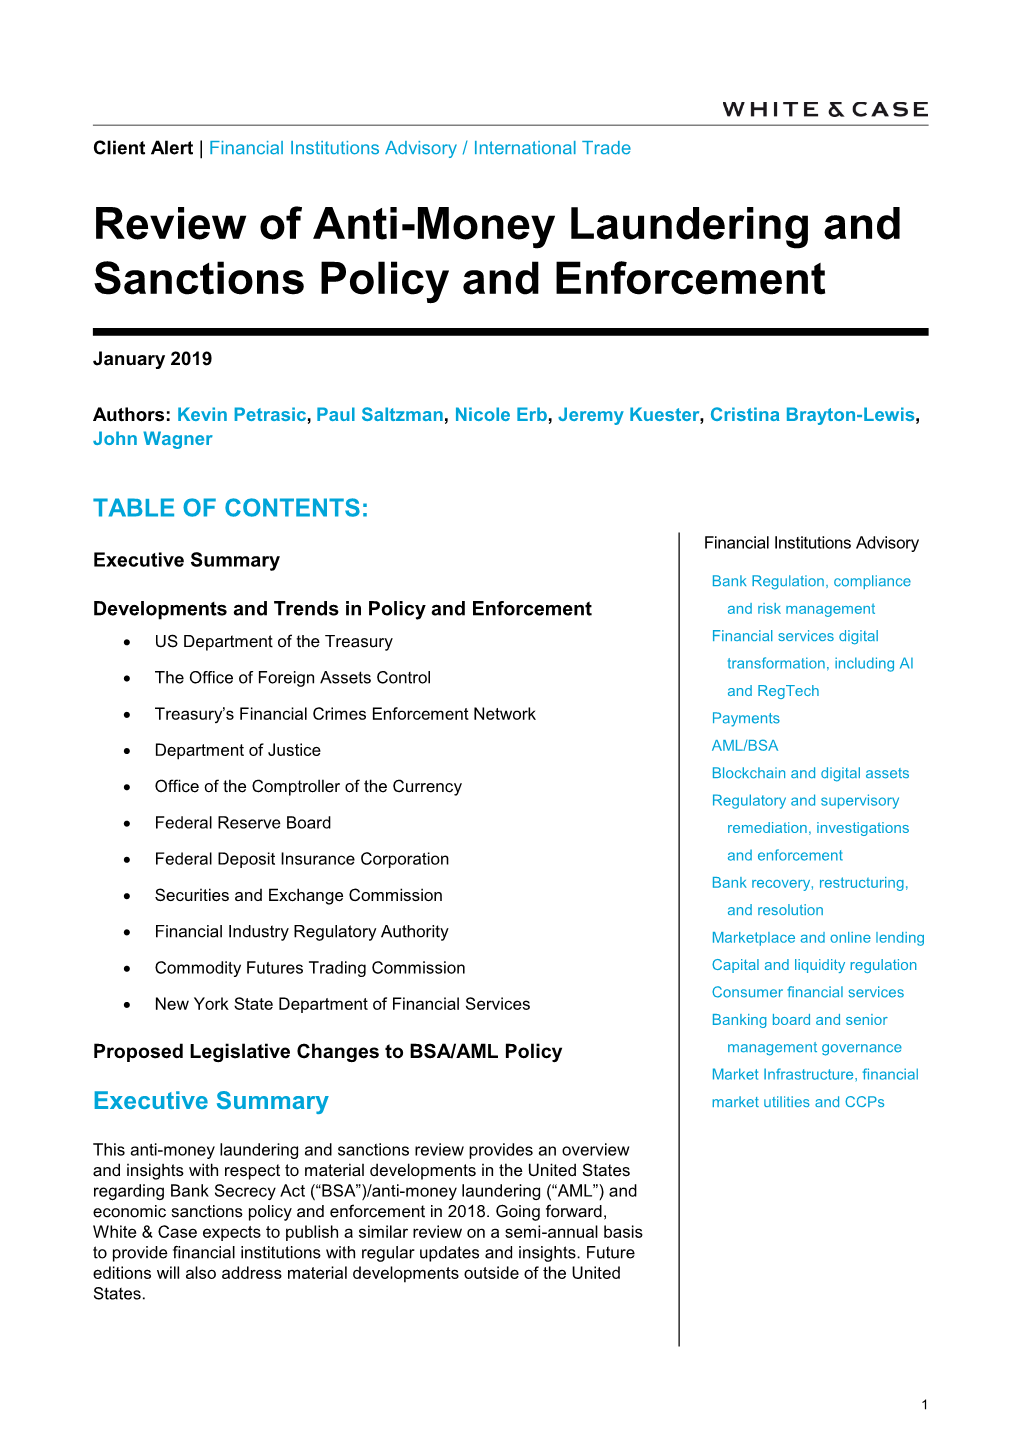 Review of Anti-Money Laundering and Sanctions Policy and Enforcement